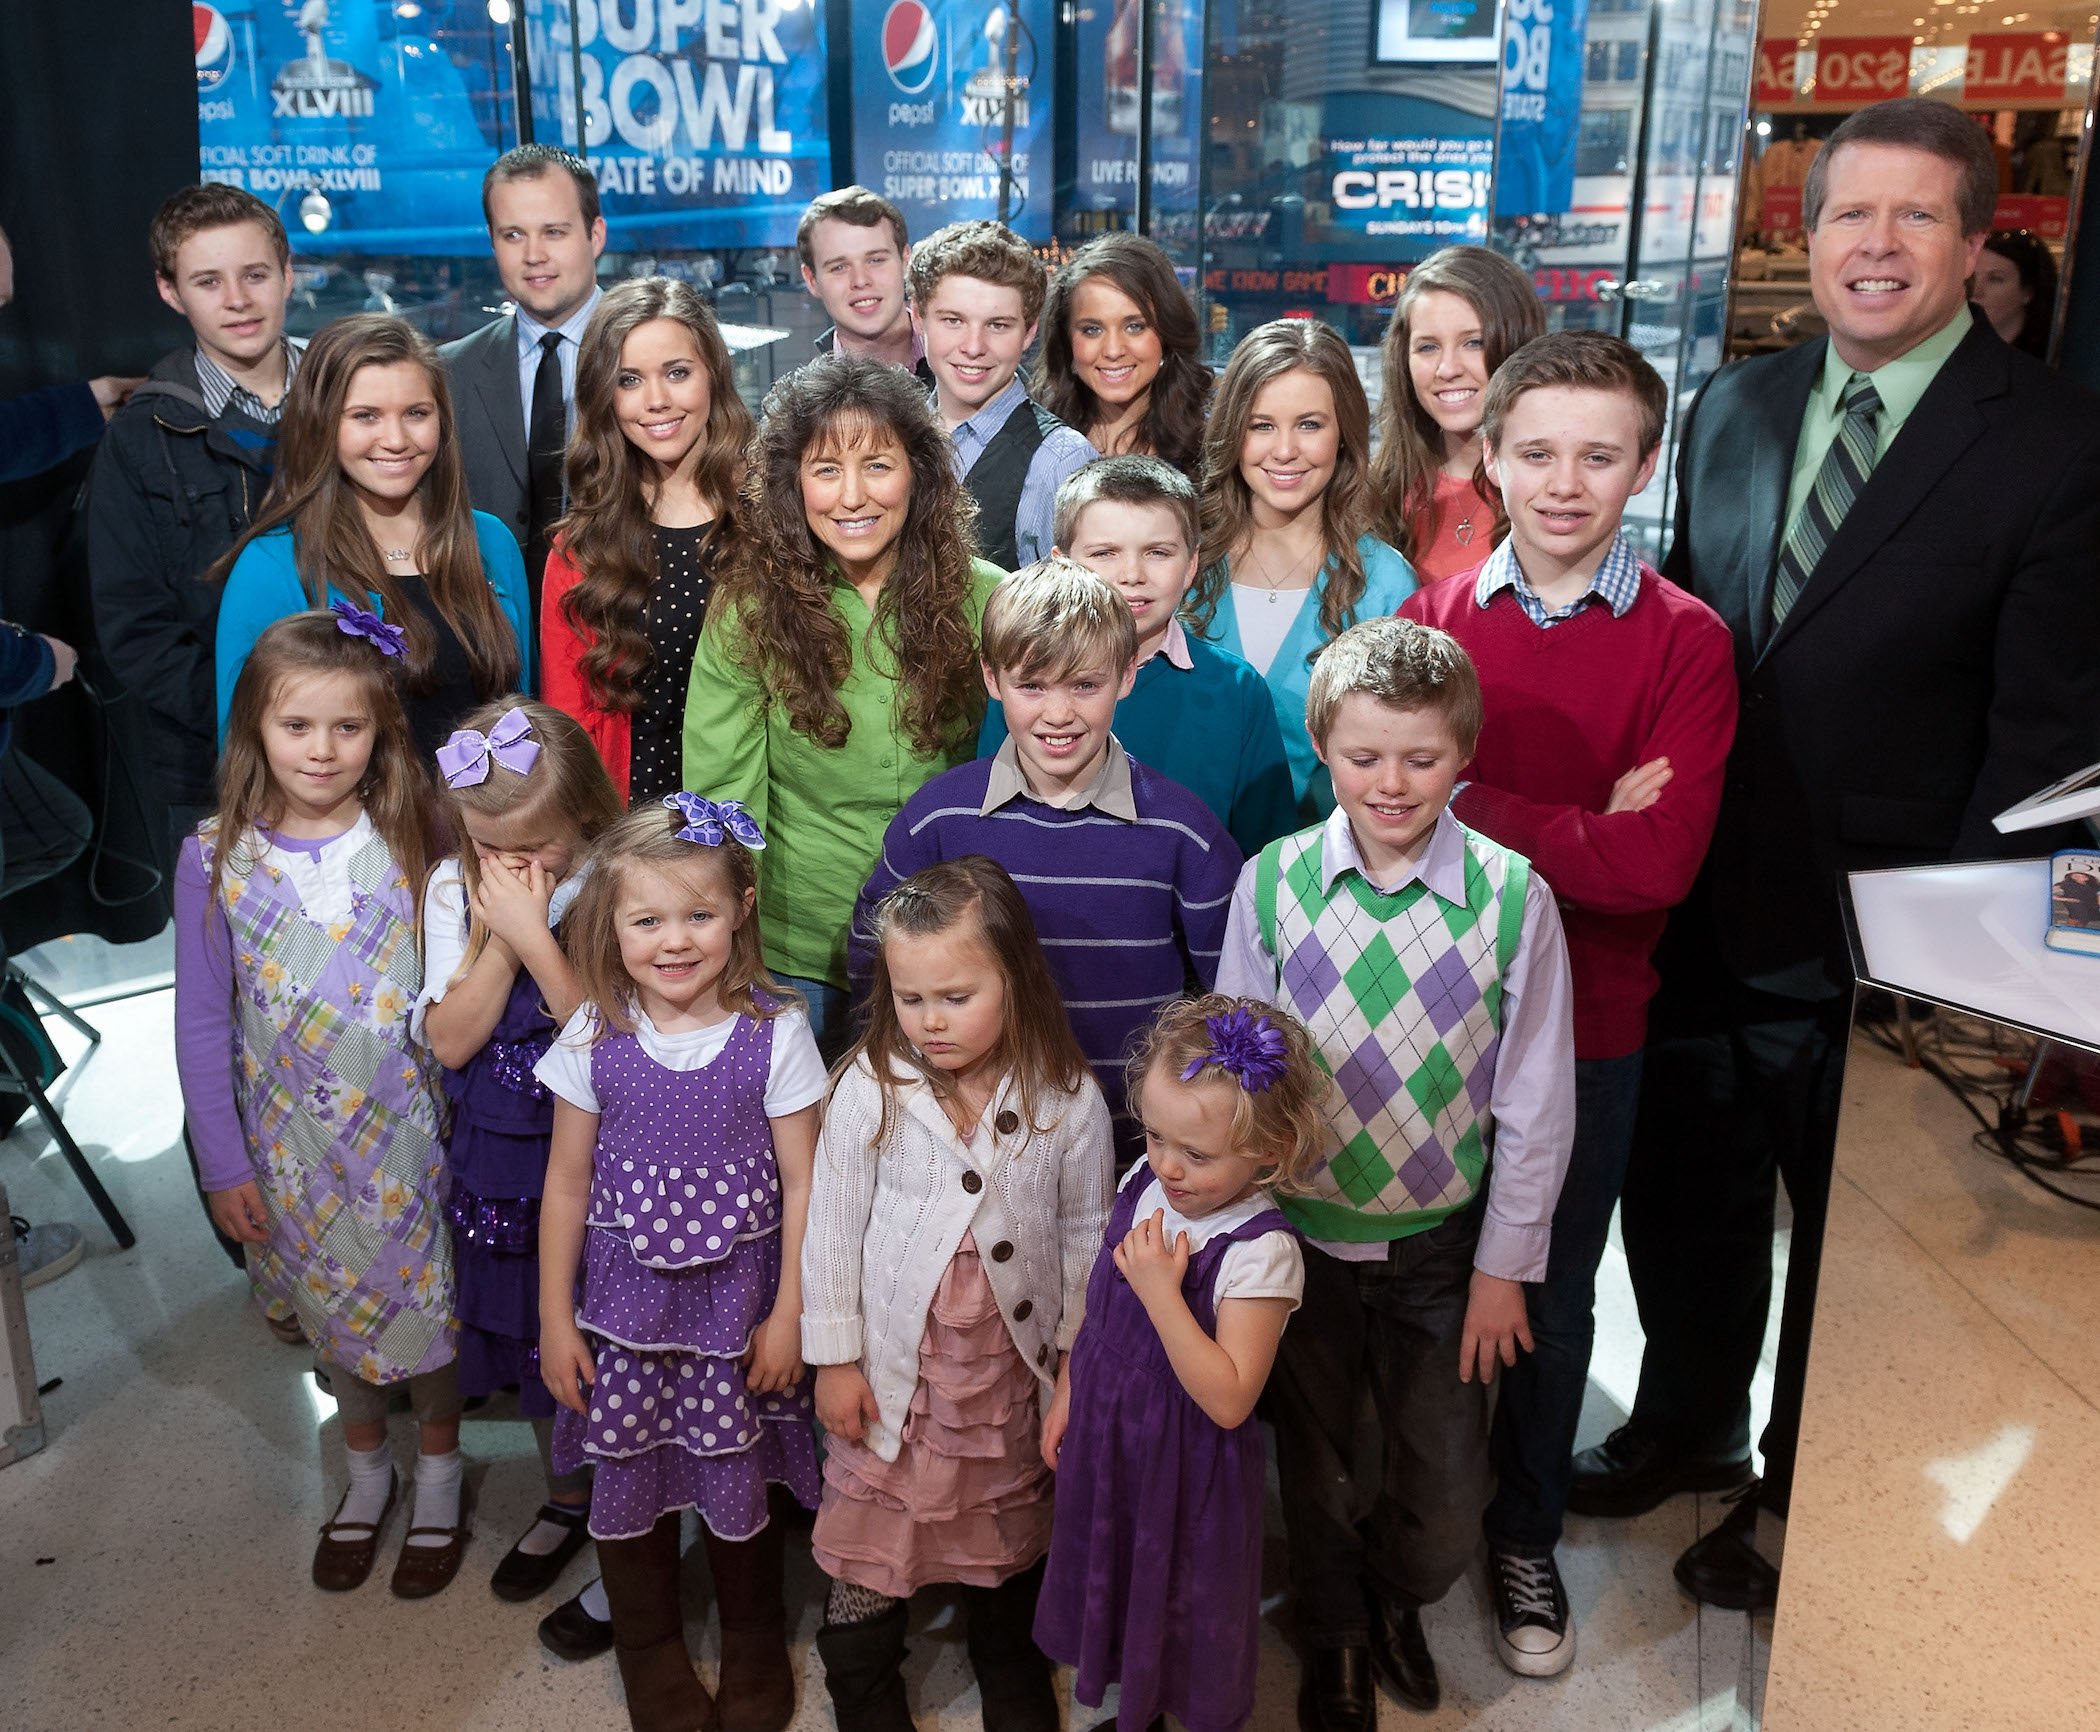 The Duggar family on the set of 'Extra' crowded together and looking up at the camera